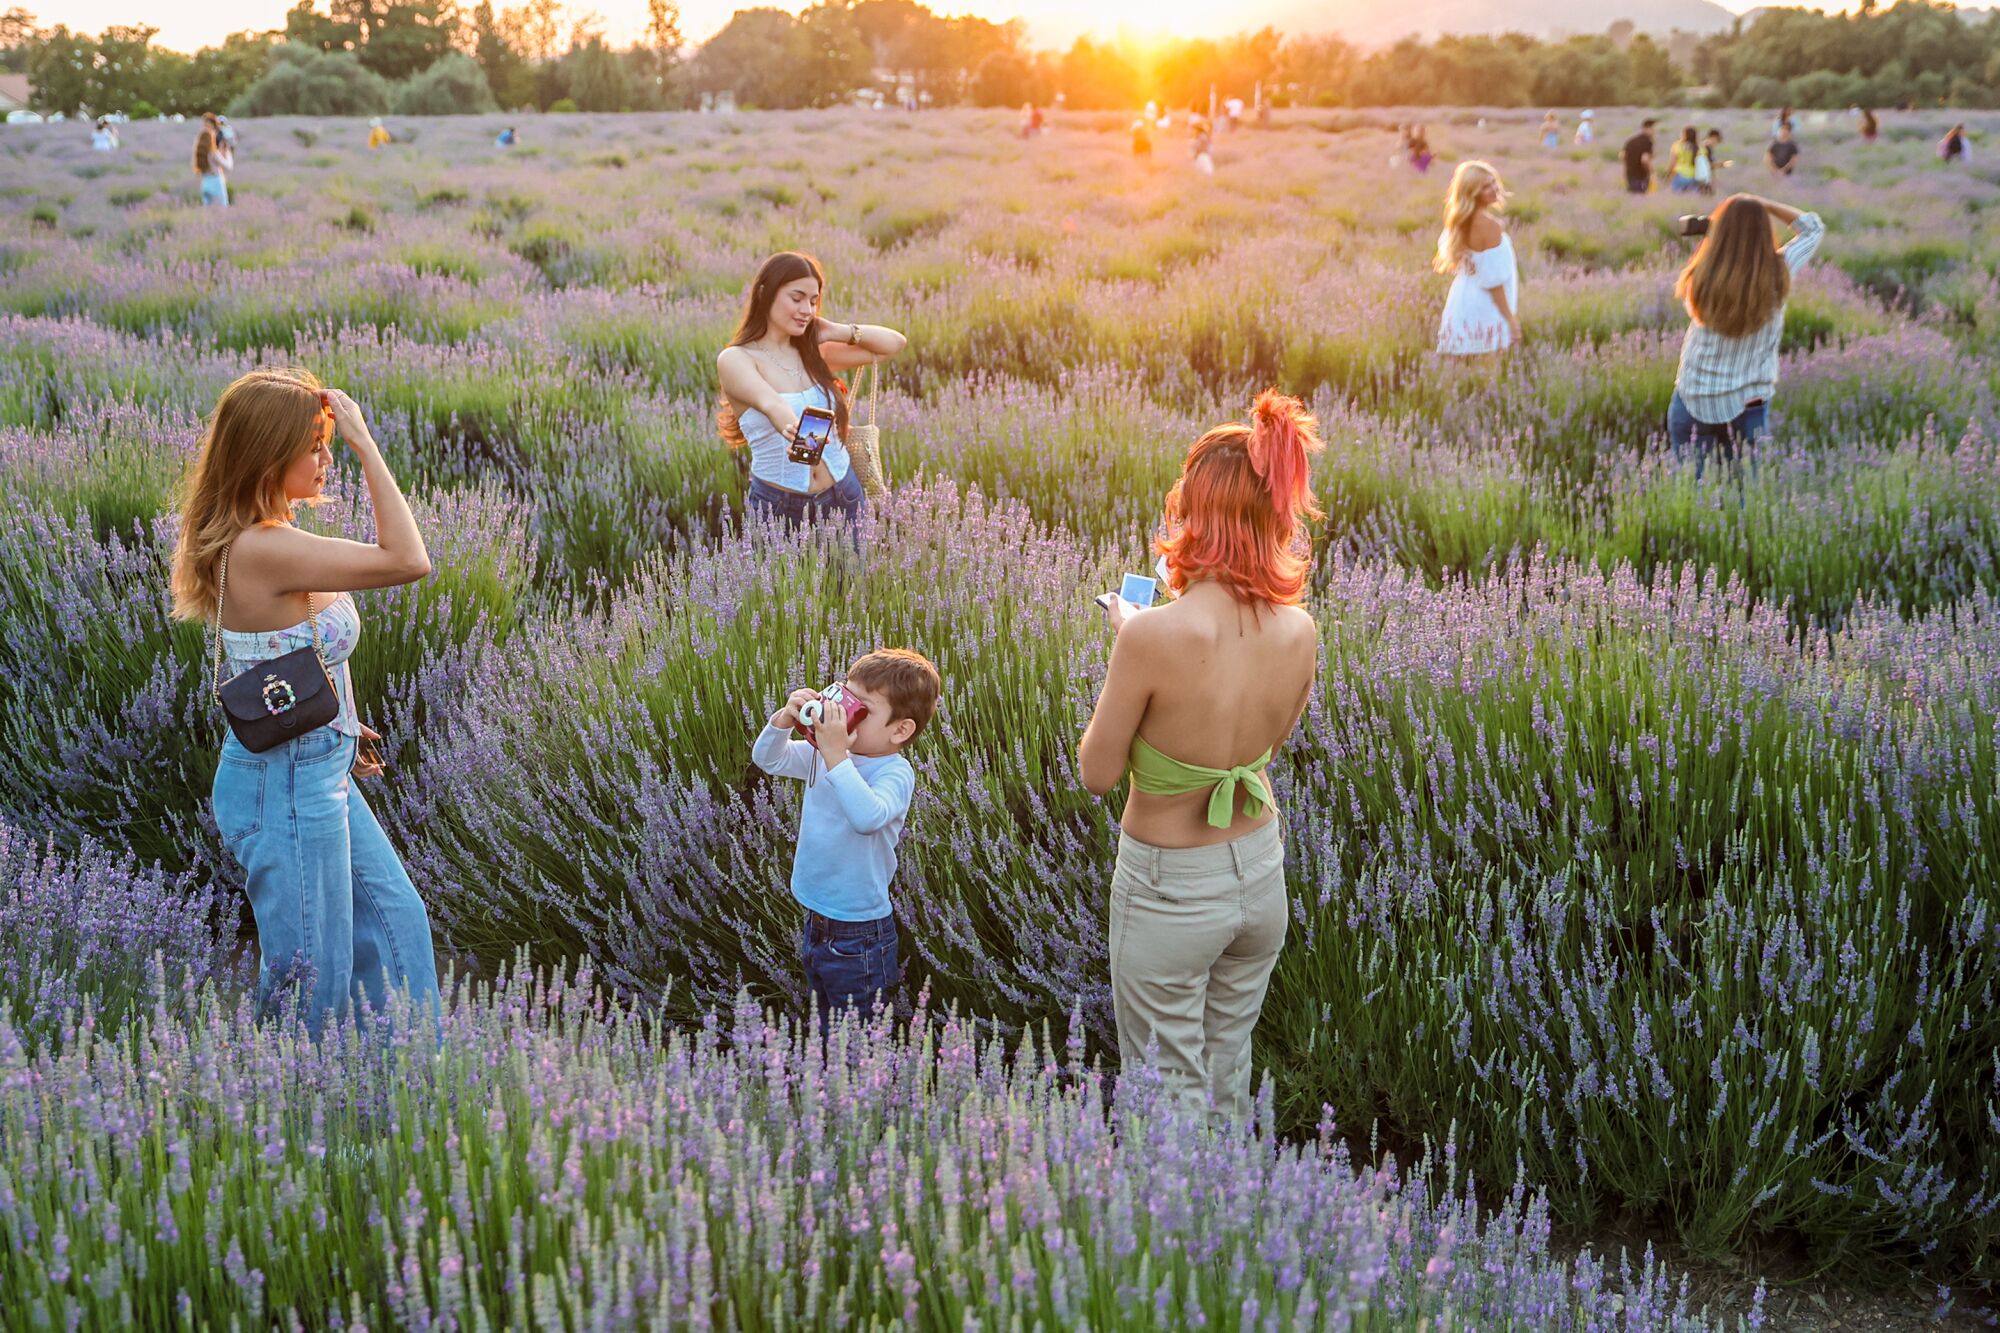 Women and a young boy taking pictures in a lavender field as the sun sets in the distance.